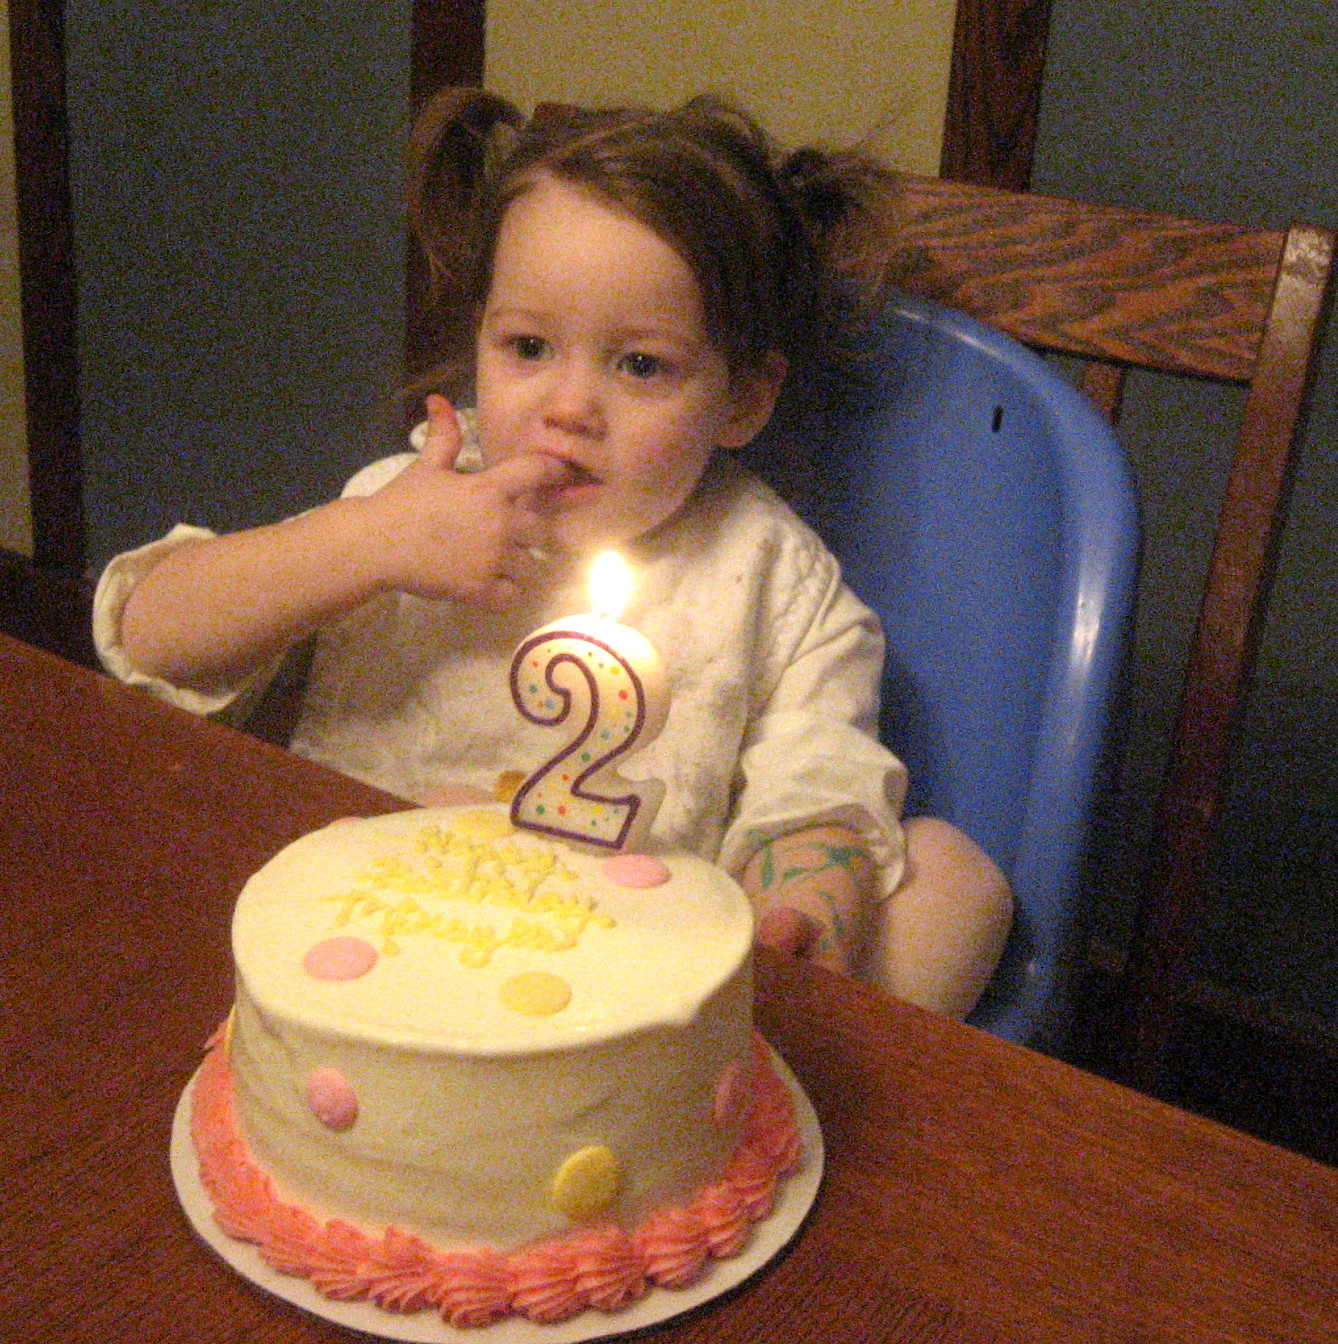 [mikayla+eating+frosting+from+cake.jpg]